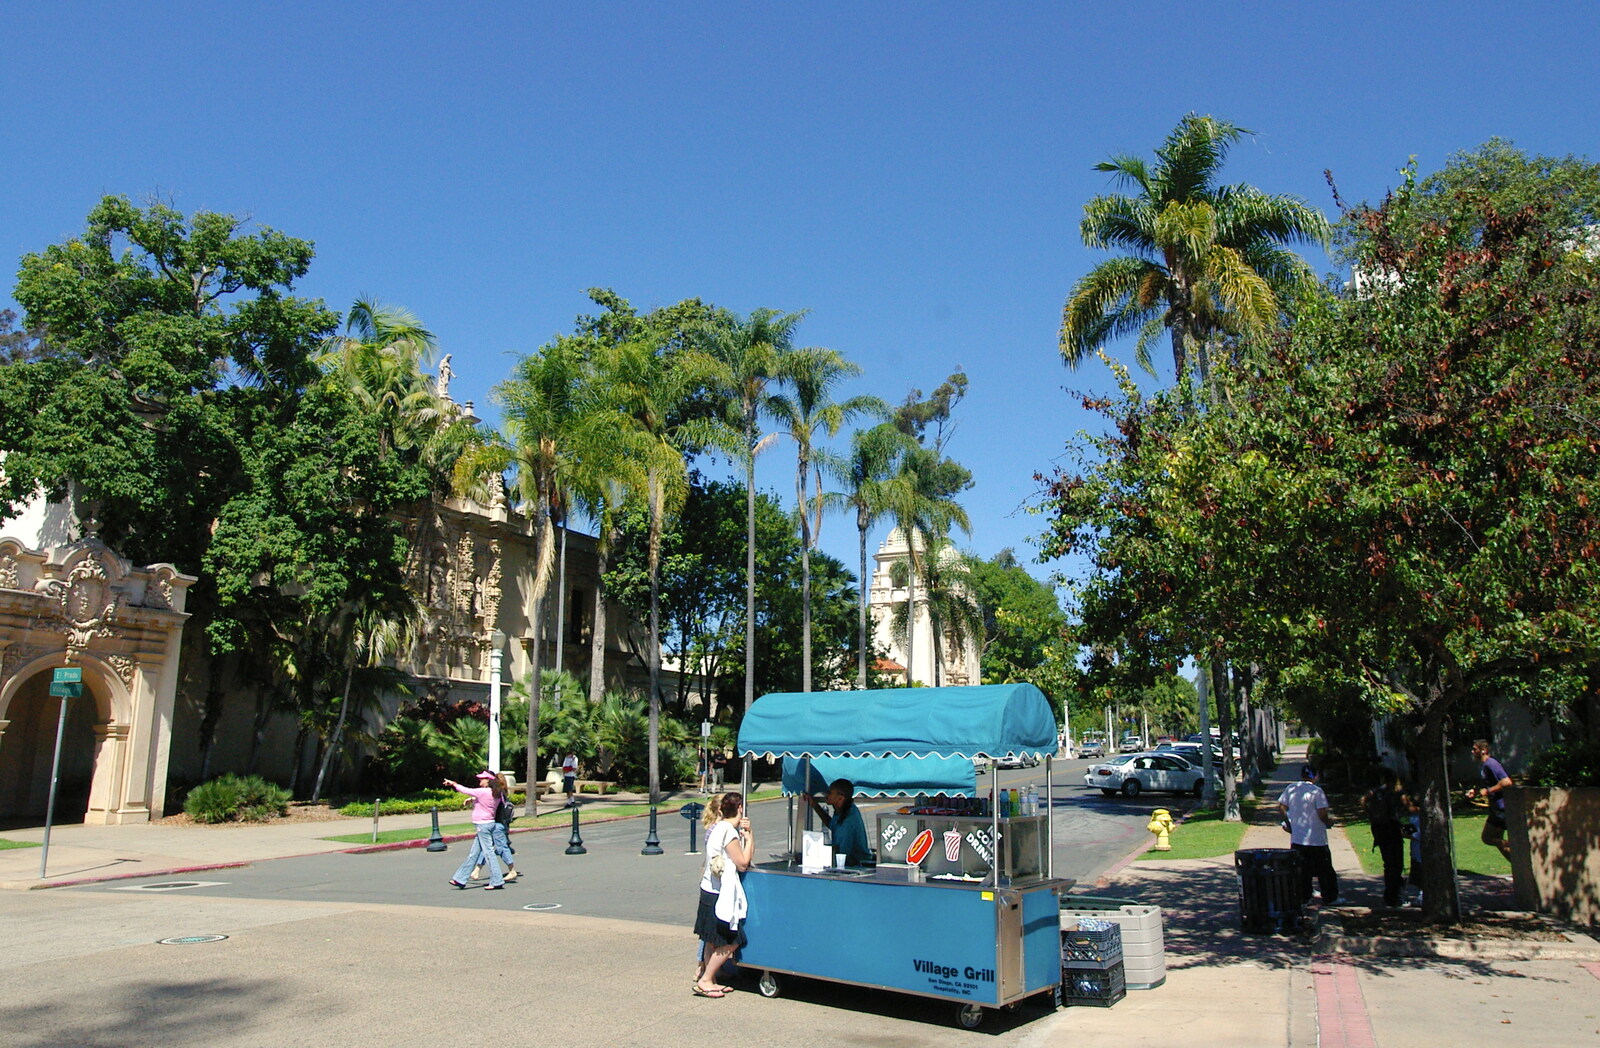 Scenes and People of Balboa Park, San Diego, California - 25th September 2005: A mobile food trailer